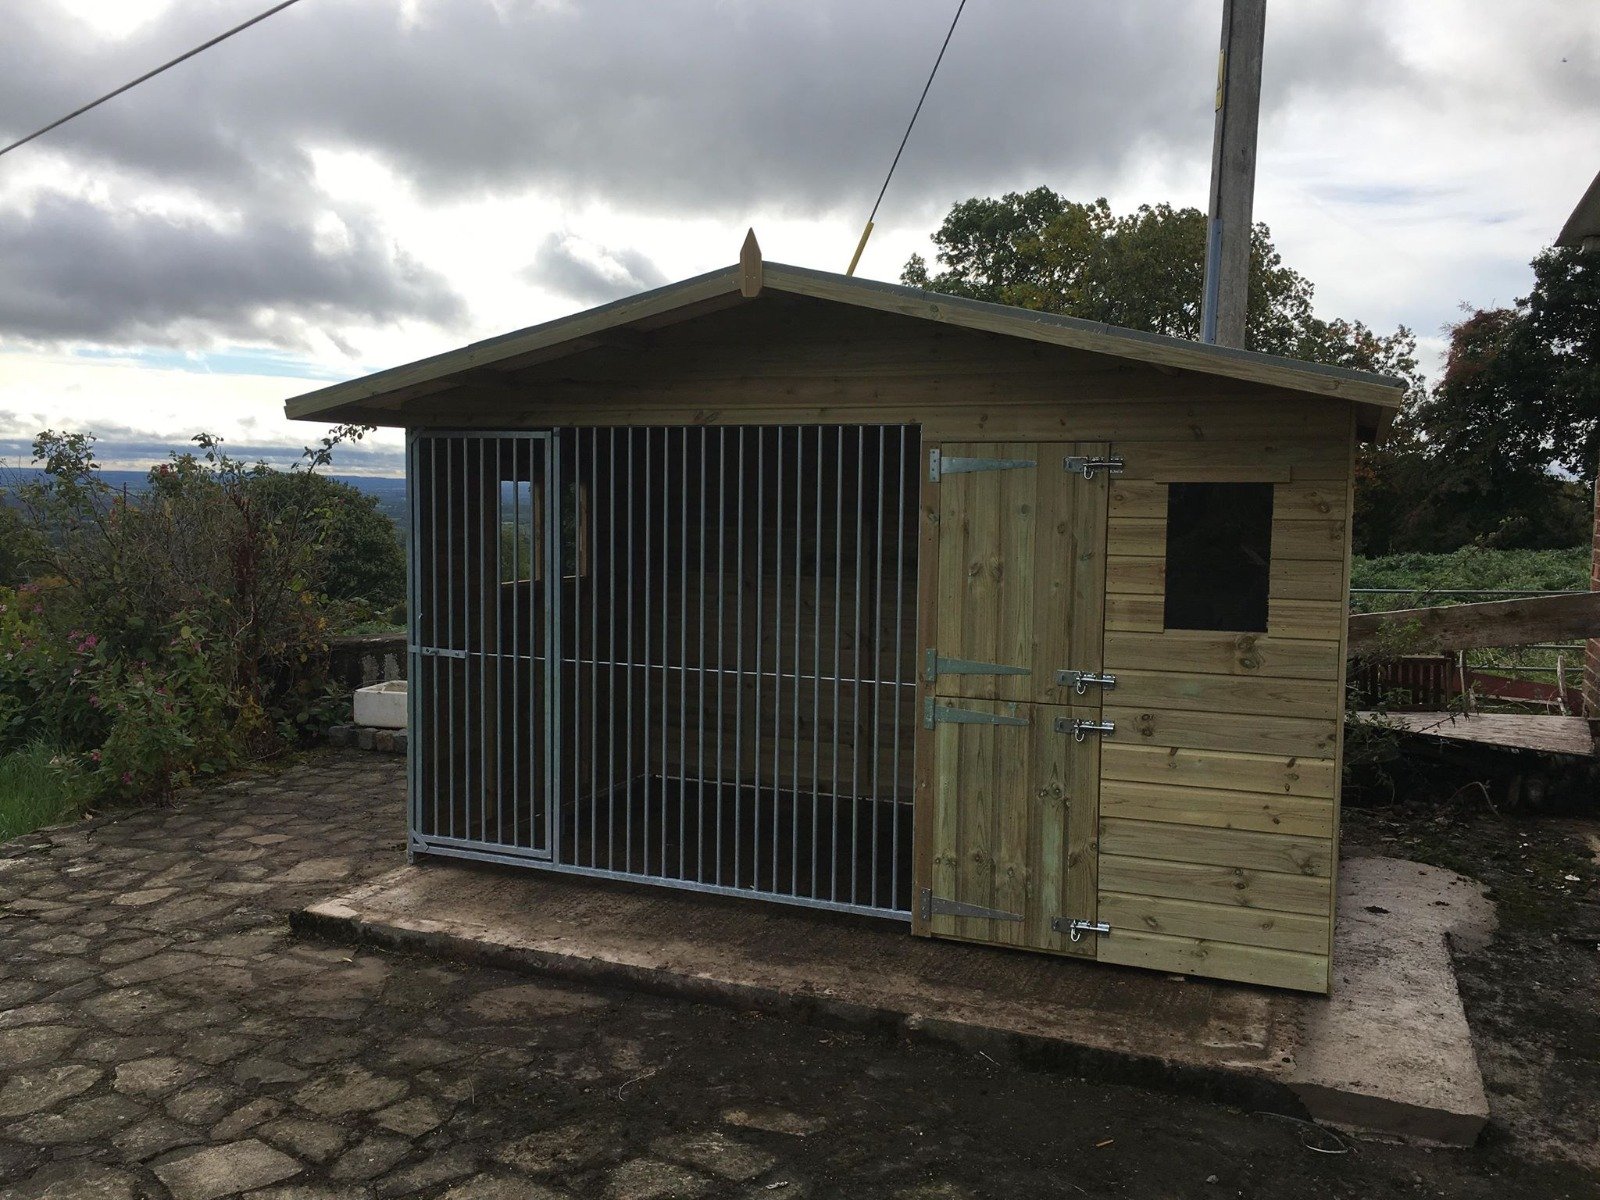 Elworth Chalet Wooden Dog Kennel And Run 12ft (wide) x 4ft (depth) x 6'6ft (apex)